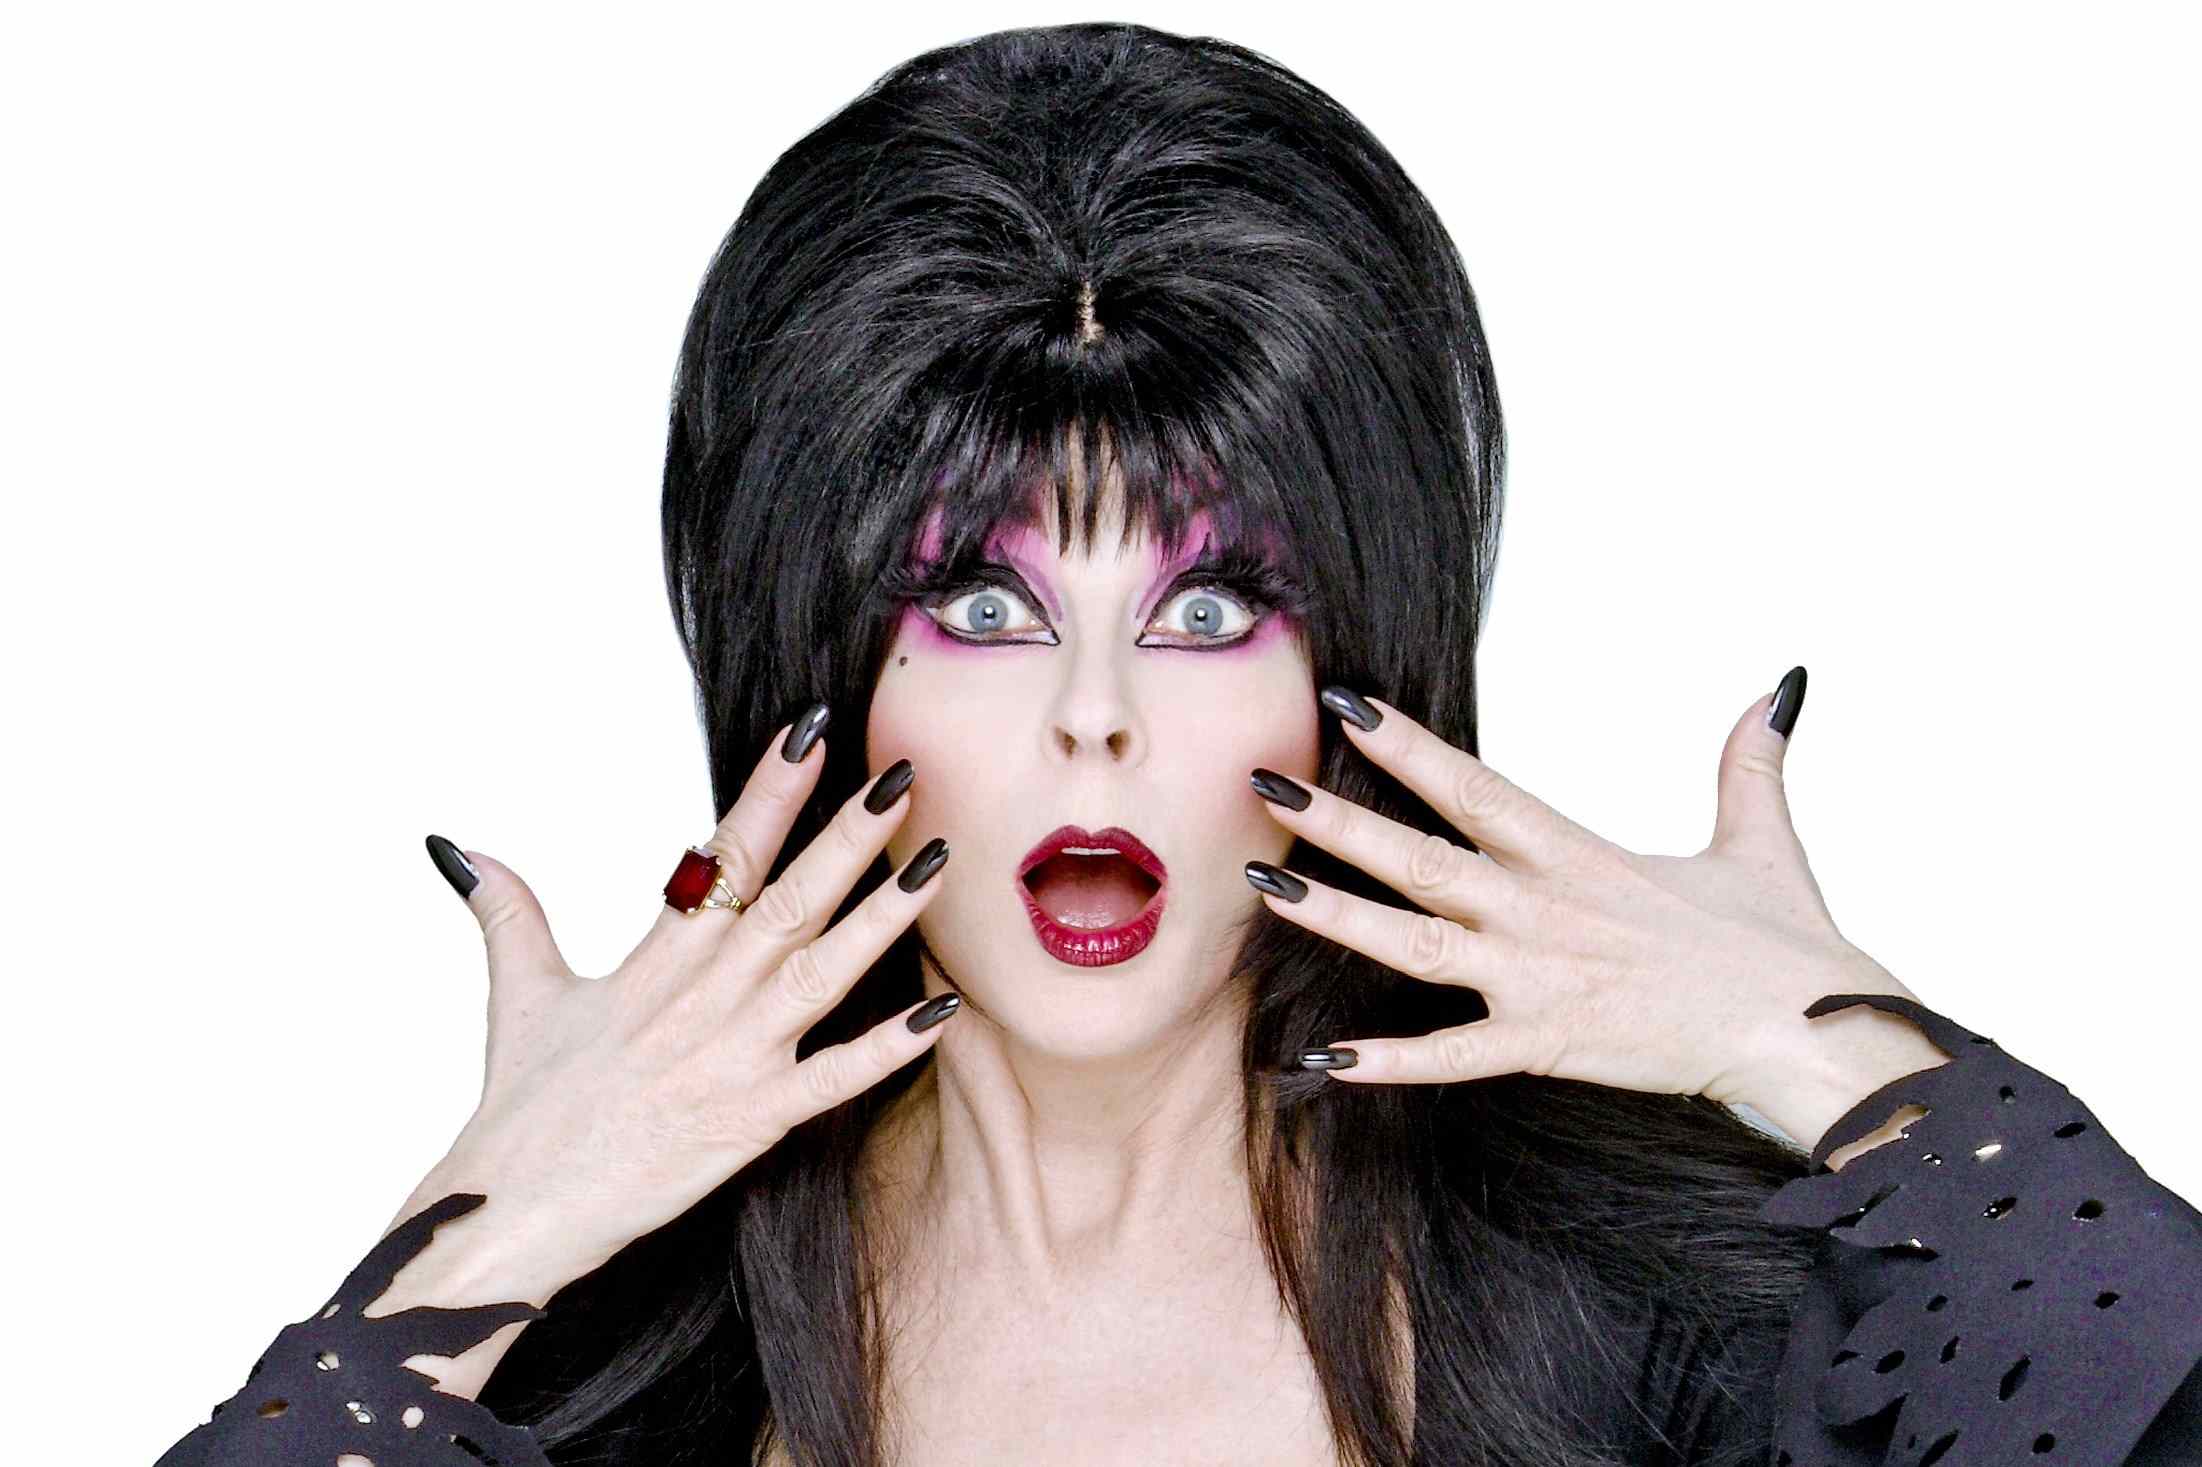 Elvira will appear on the A&E series Epic Ink.